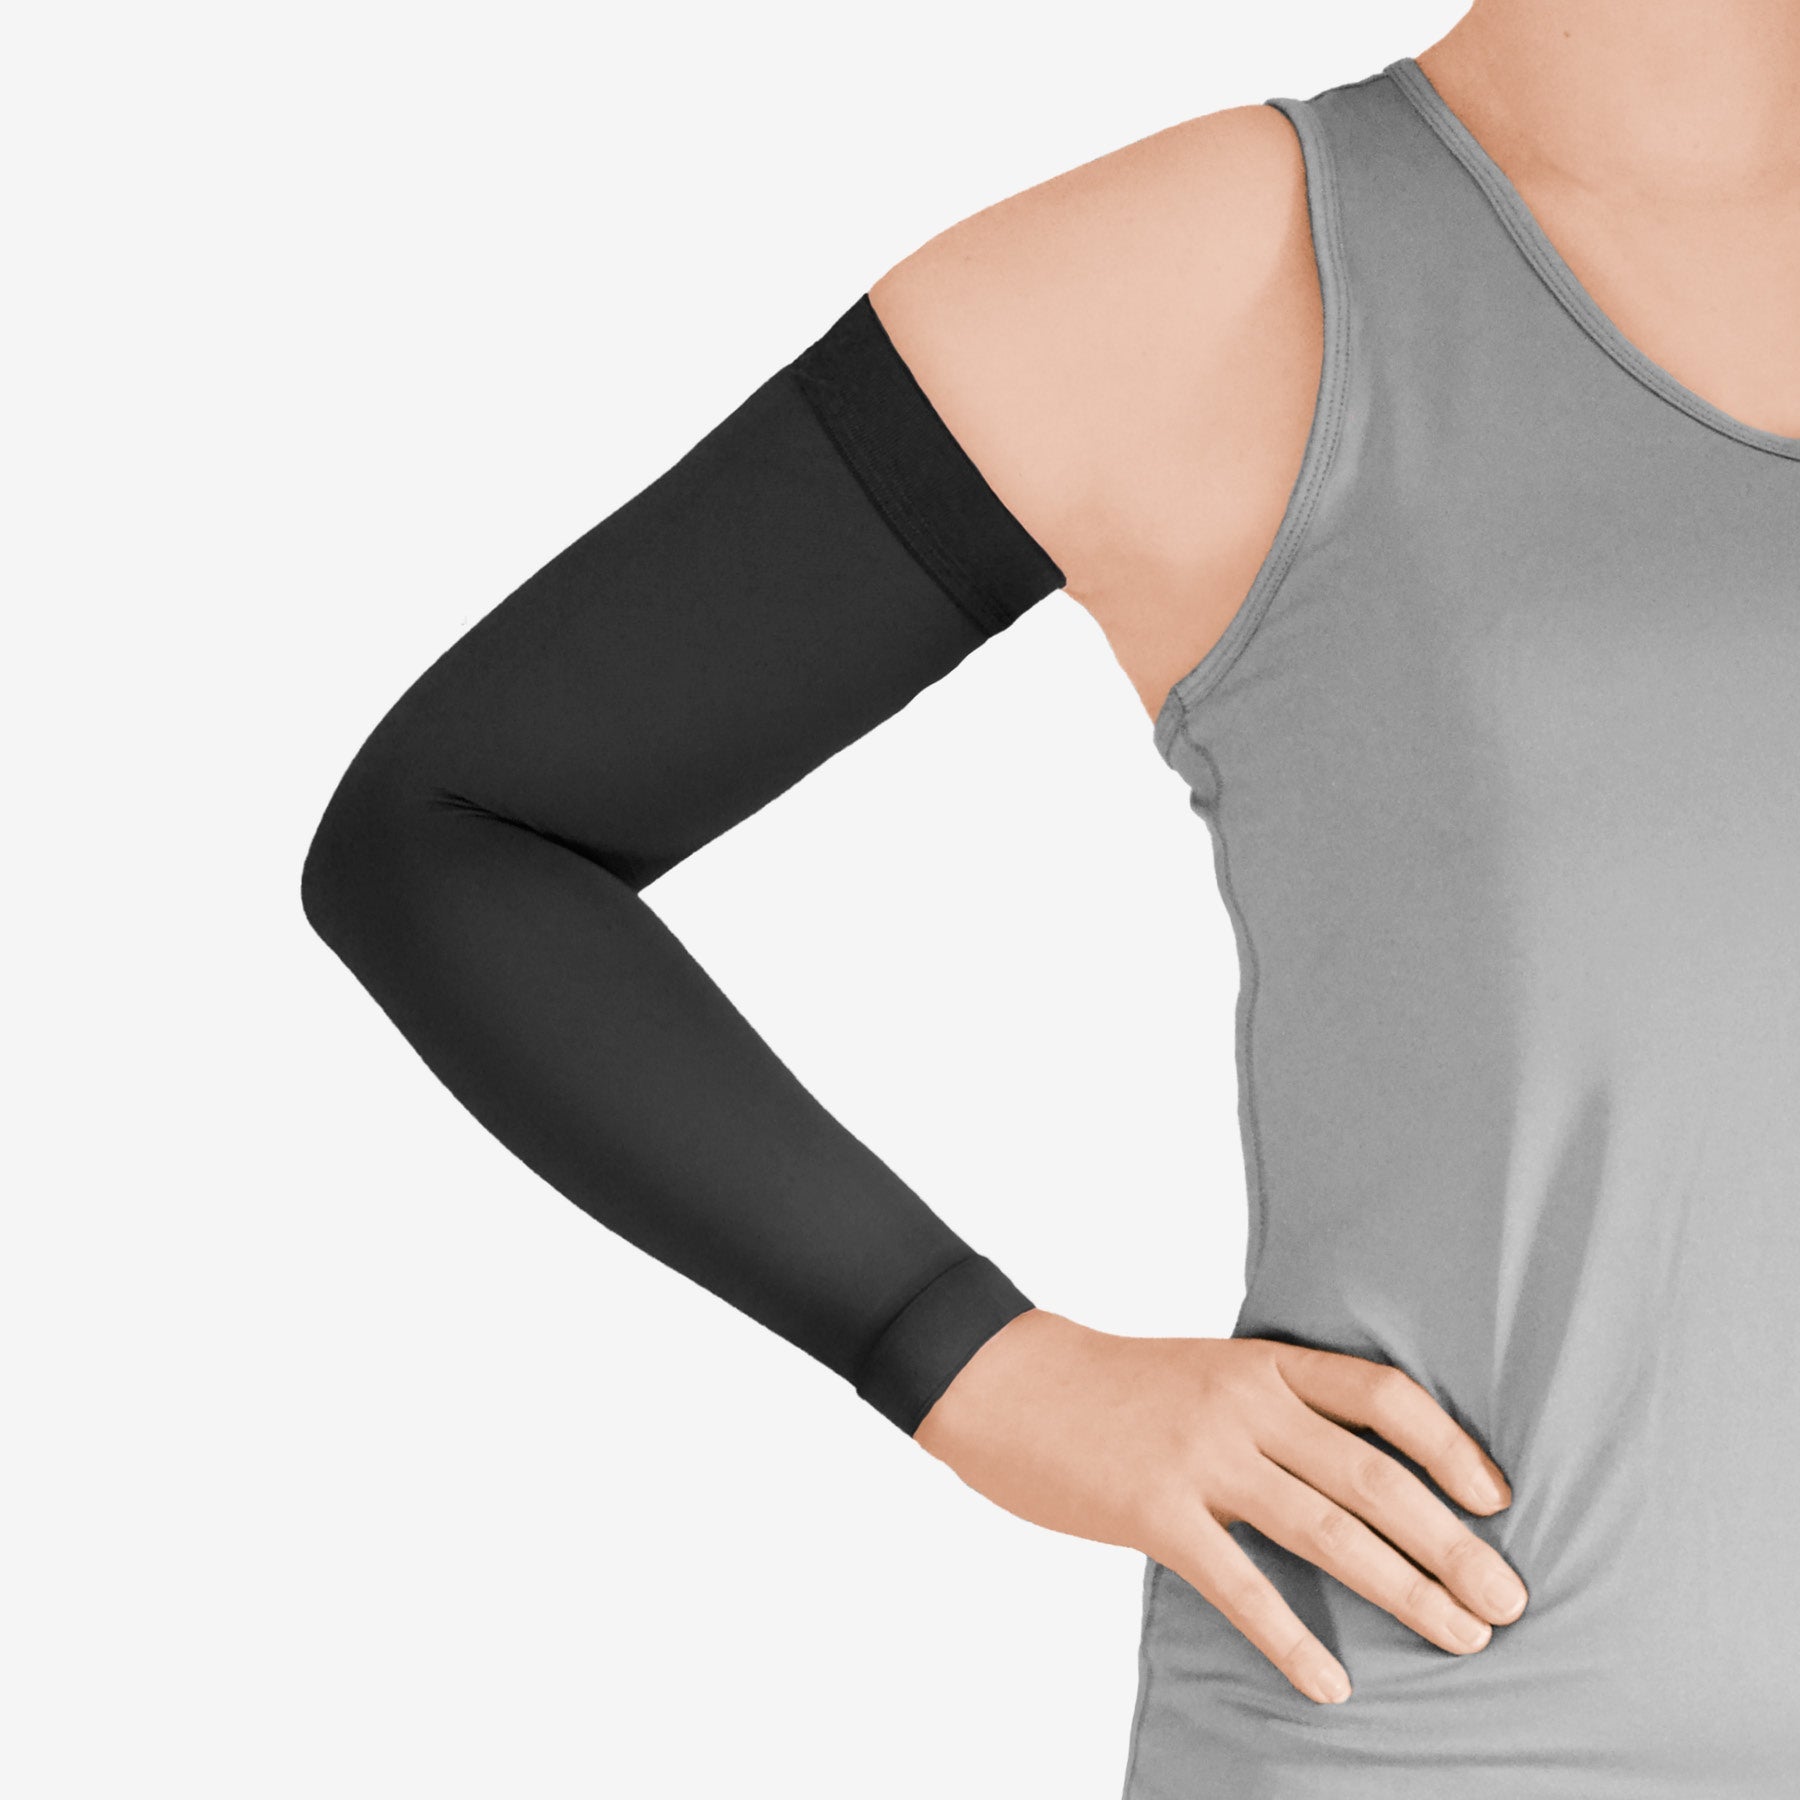 JOBST® Bella™ Strong Armsleeve 20-30 mmHg w/ Silicone Top Band